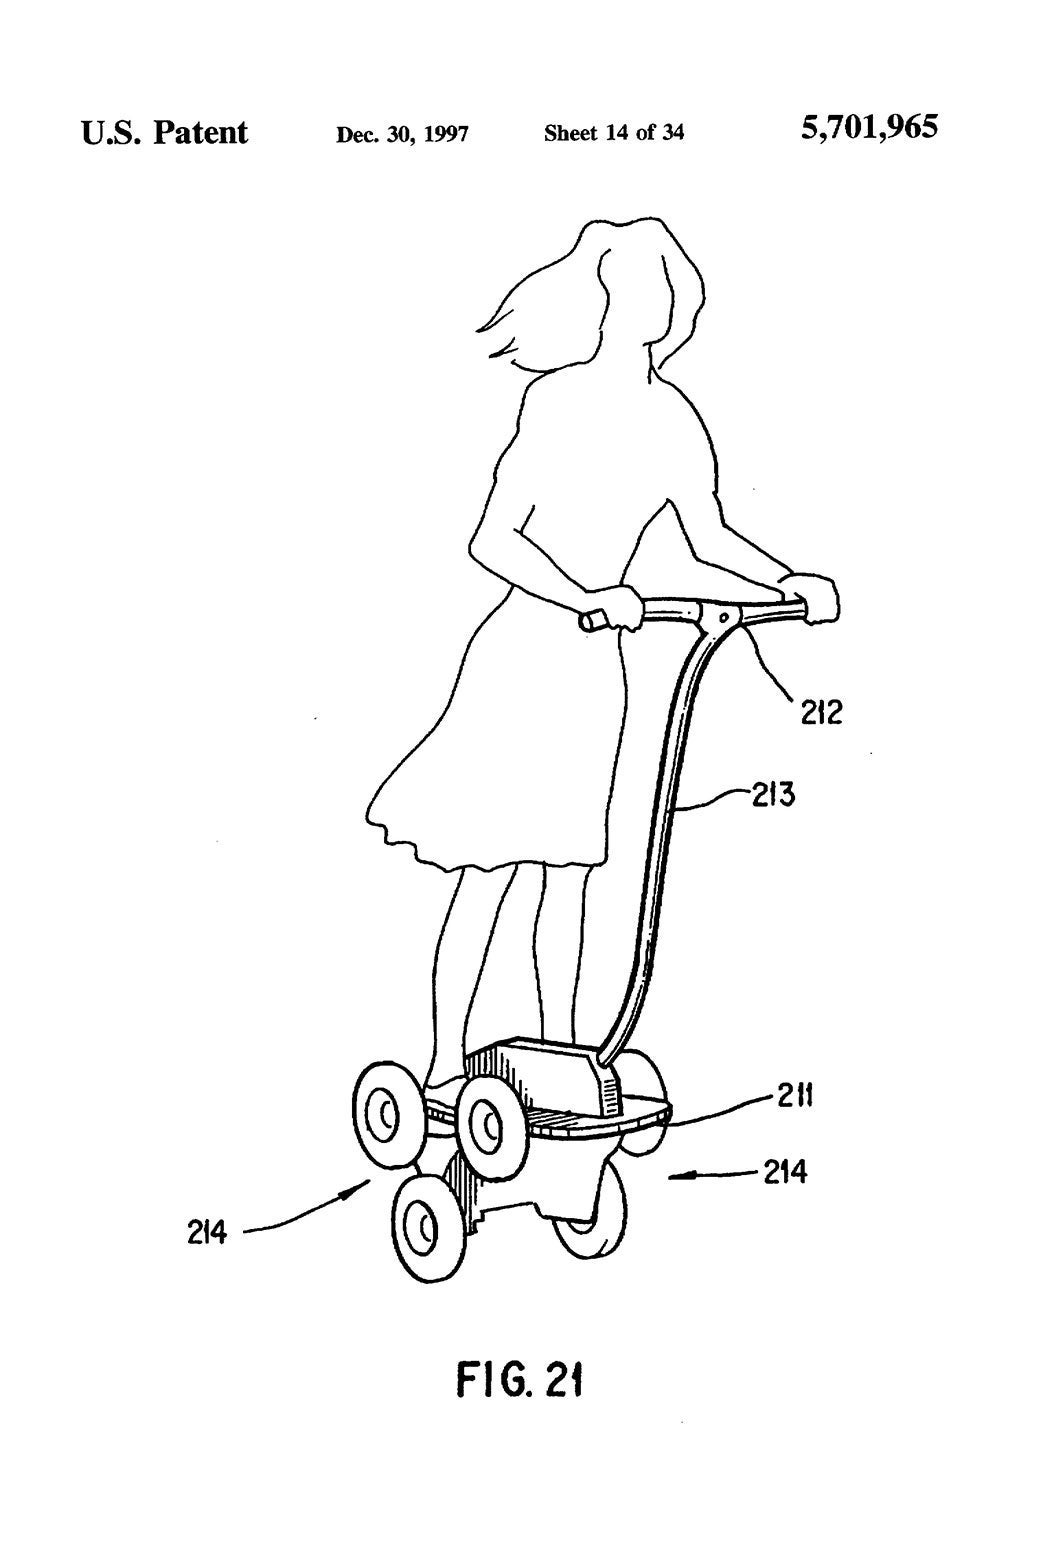 A patent application drawing of a woman on a scooter.